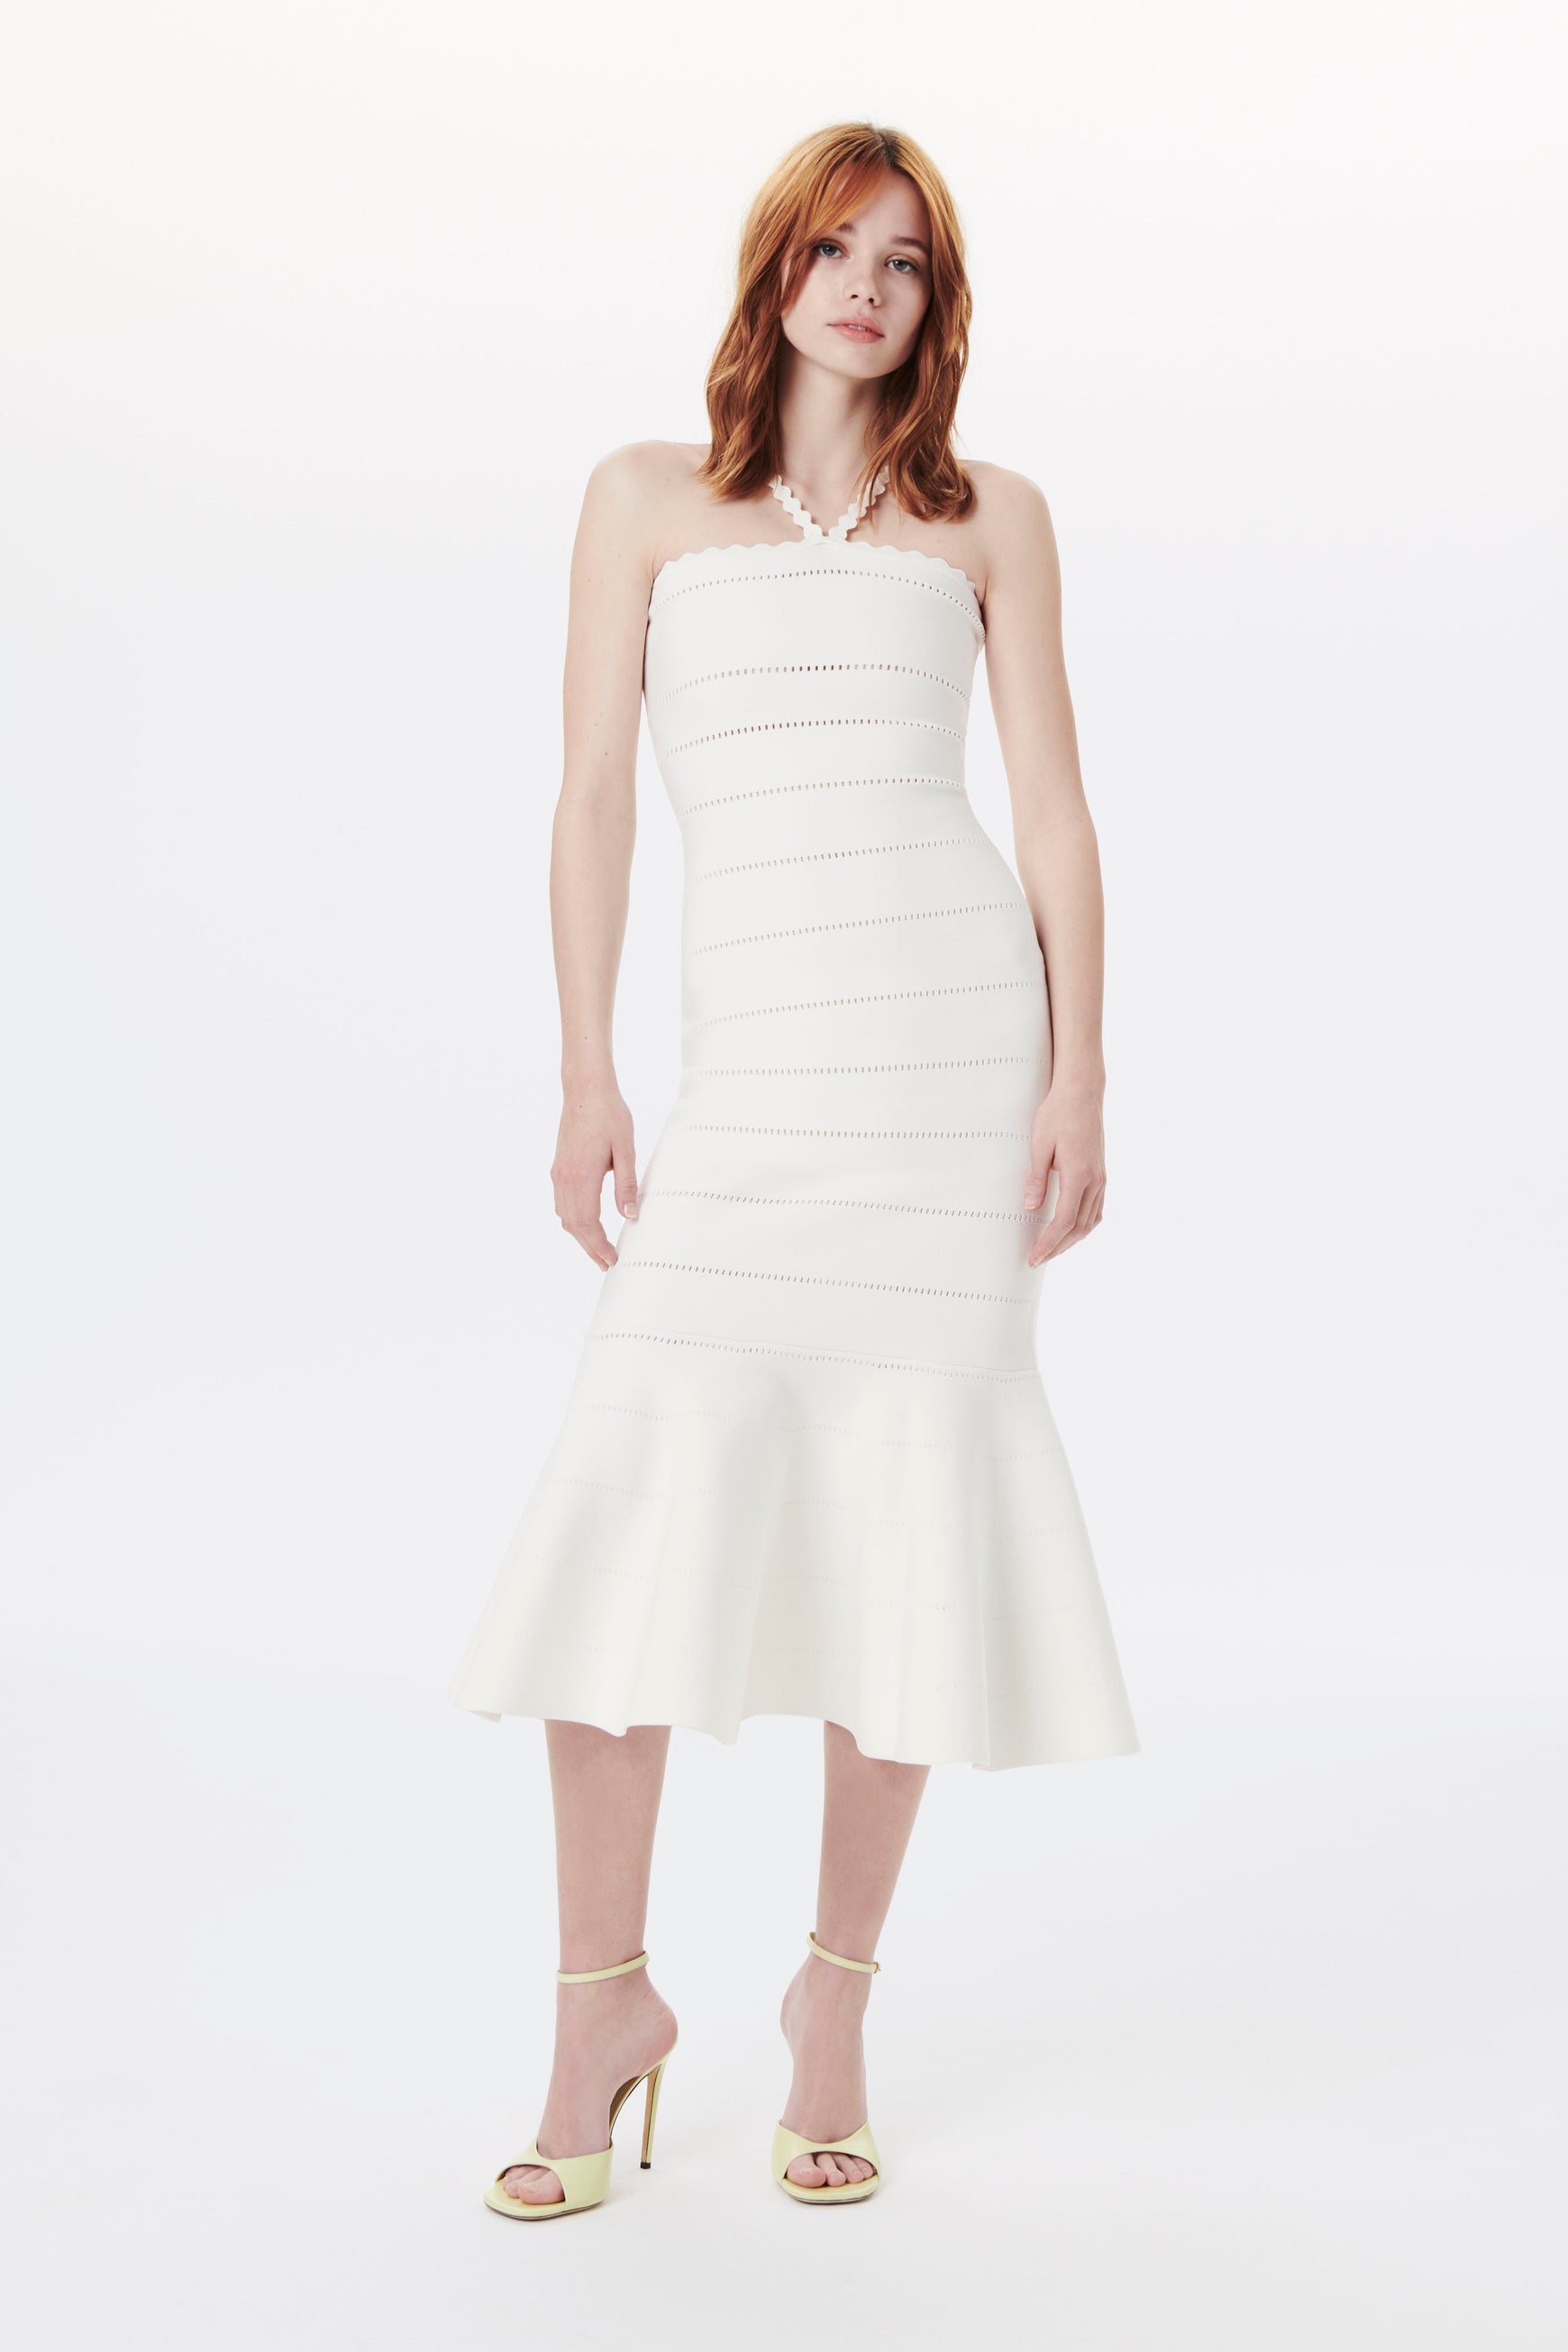 The Scalloped Strap Flare Dress in white from Victoria Beckham is made from compact viscose fabrics which was crafted to a body-con design with flounced hem for a feminine dress look.